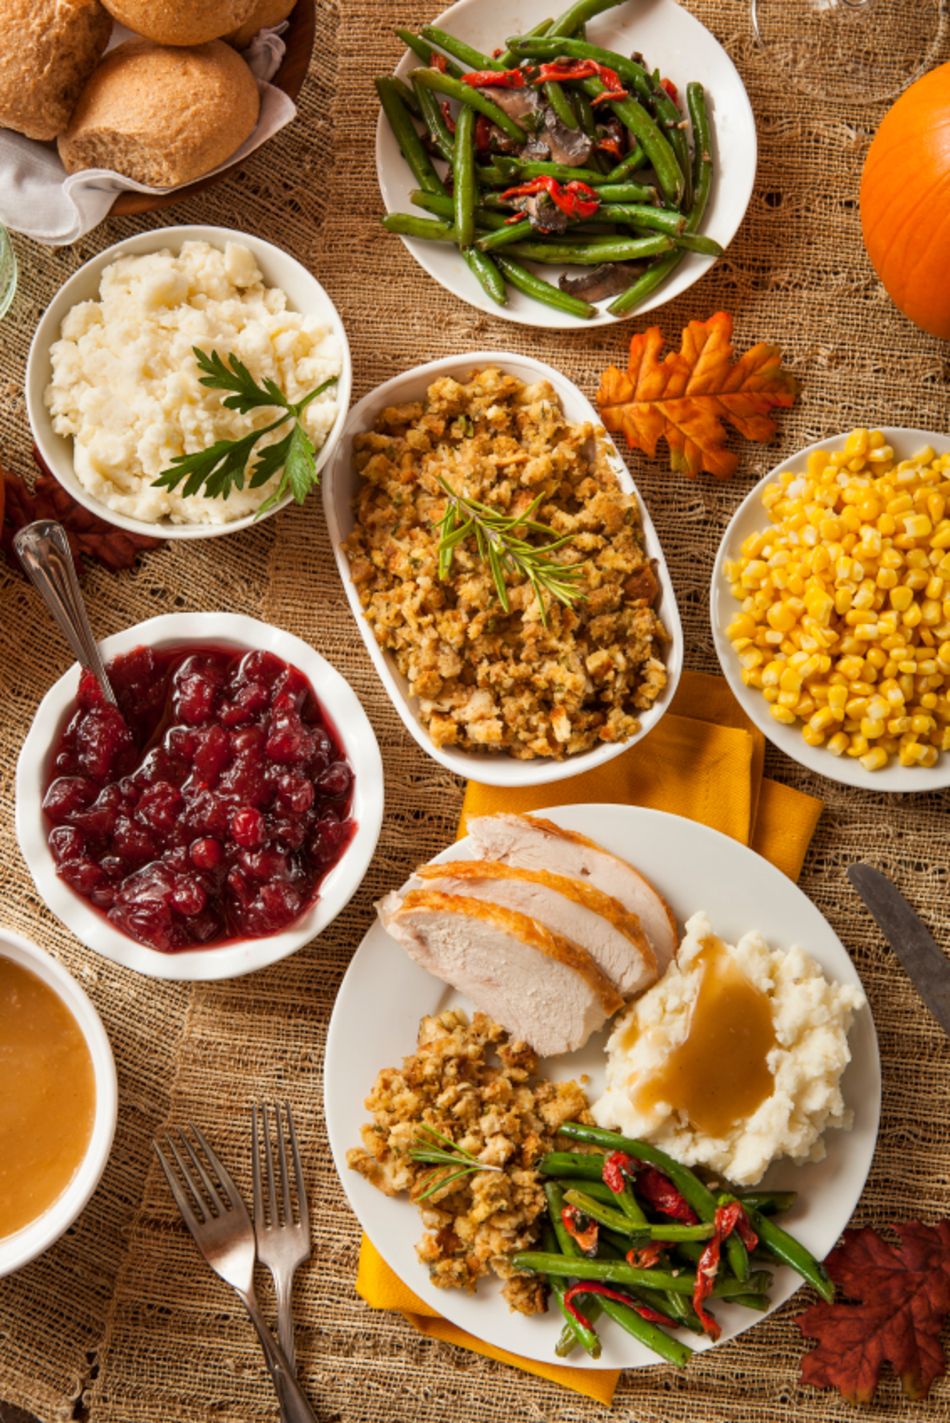 Tasty and Healthy Thanksgiving Choices